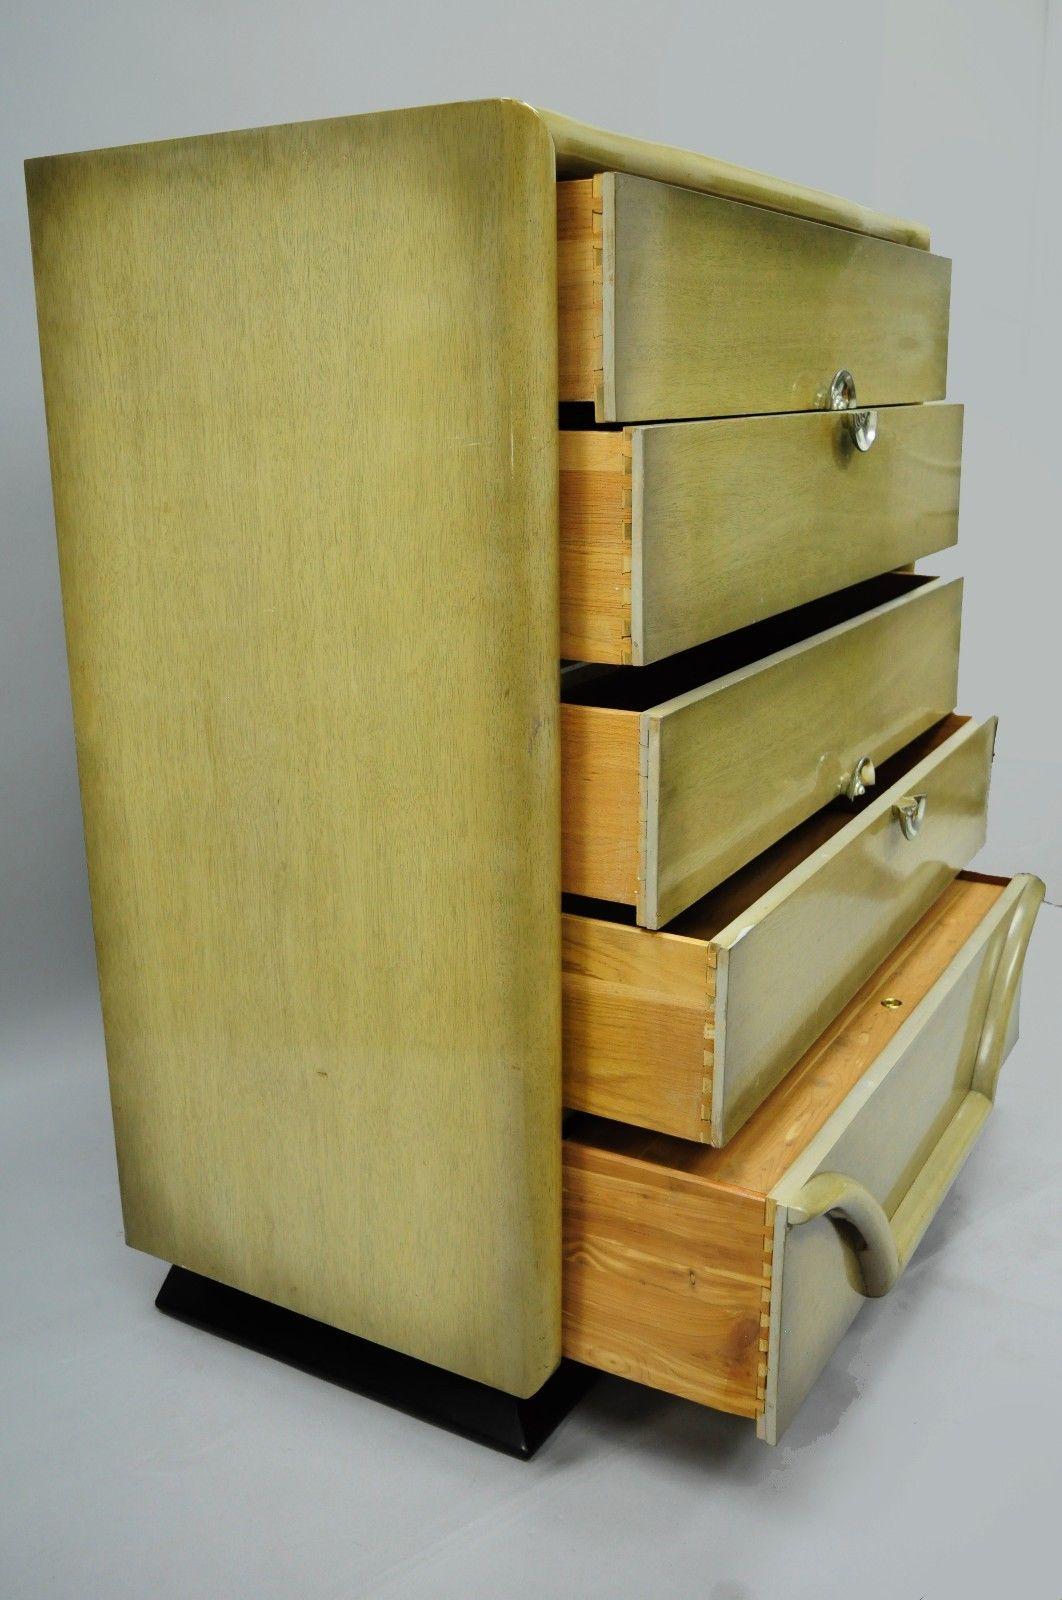 Vintage Mid-Century Modern bone color chest by Tri-Bond. Item features cedar-lined lower drawer, heavy wood construction, mahogany wood veneer, bone color finish, original label, five dovetail constructed drawers, quality American craftsmanship,